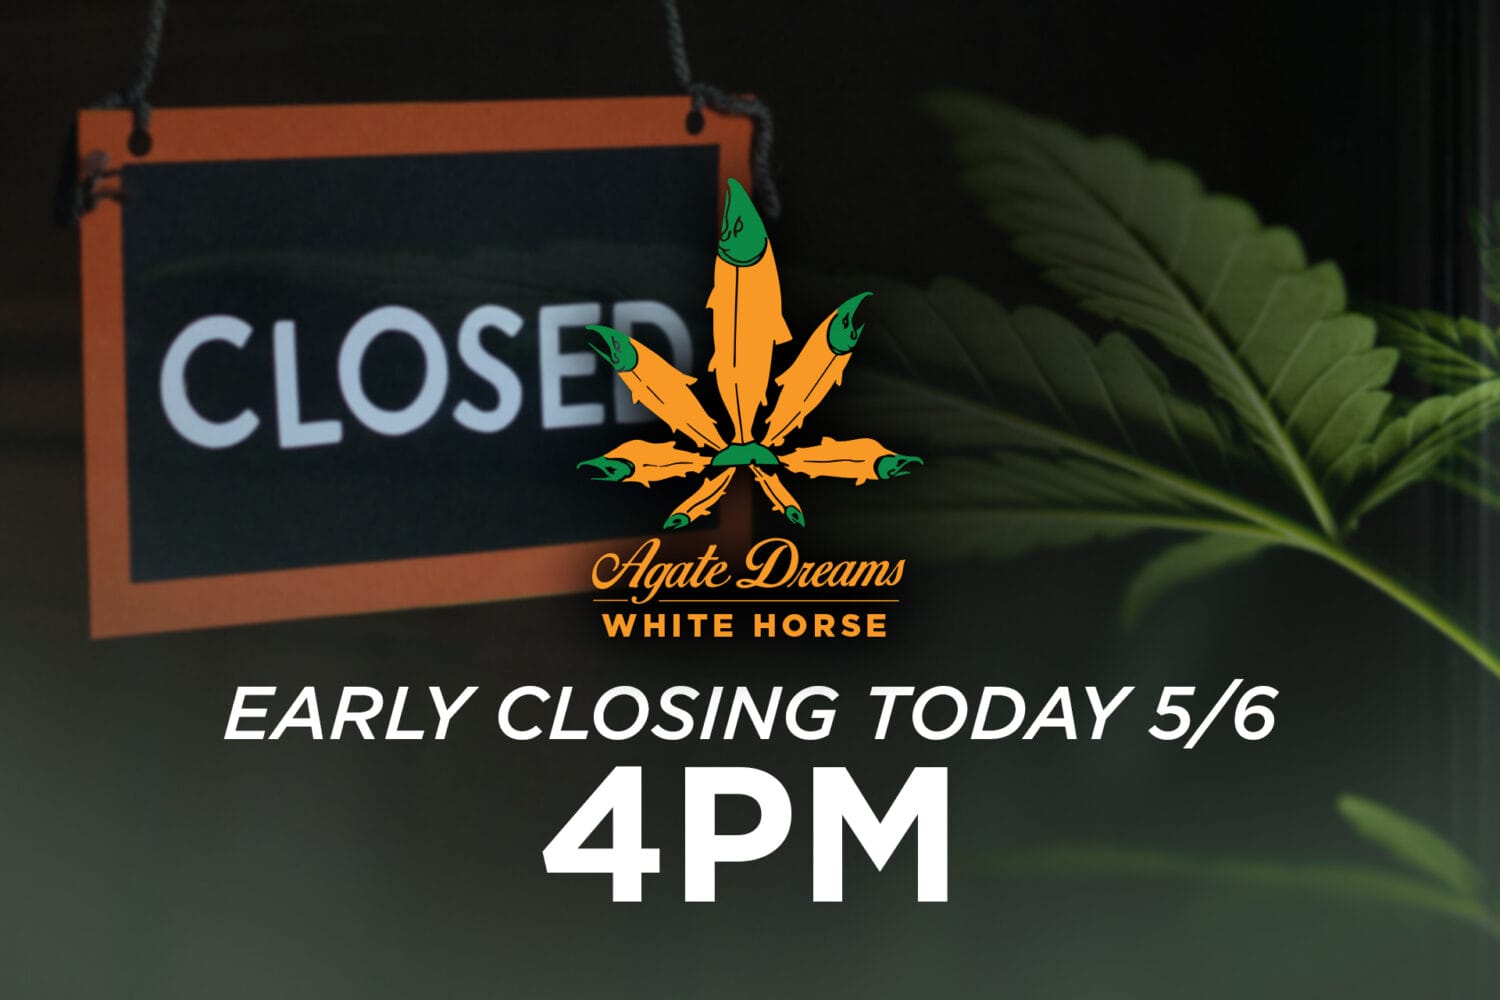 White Horse Closing Early